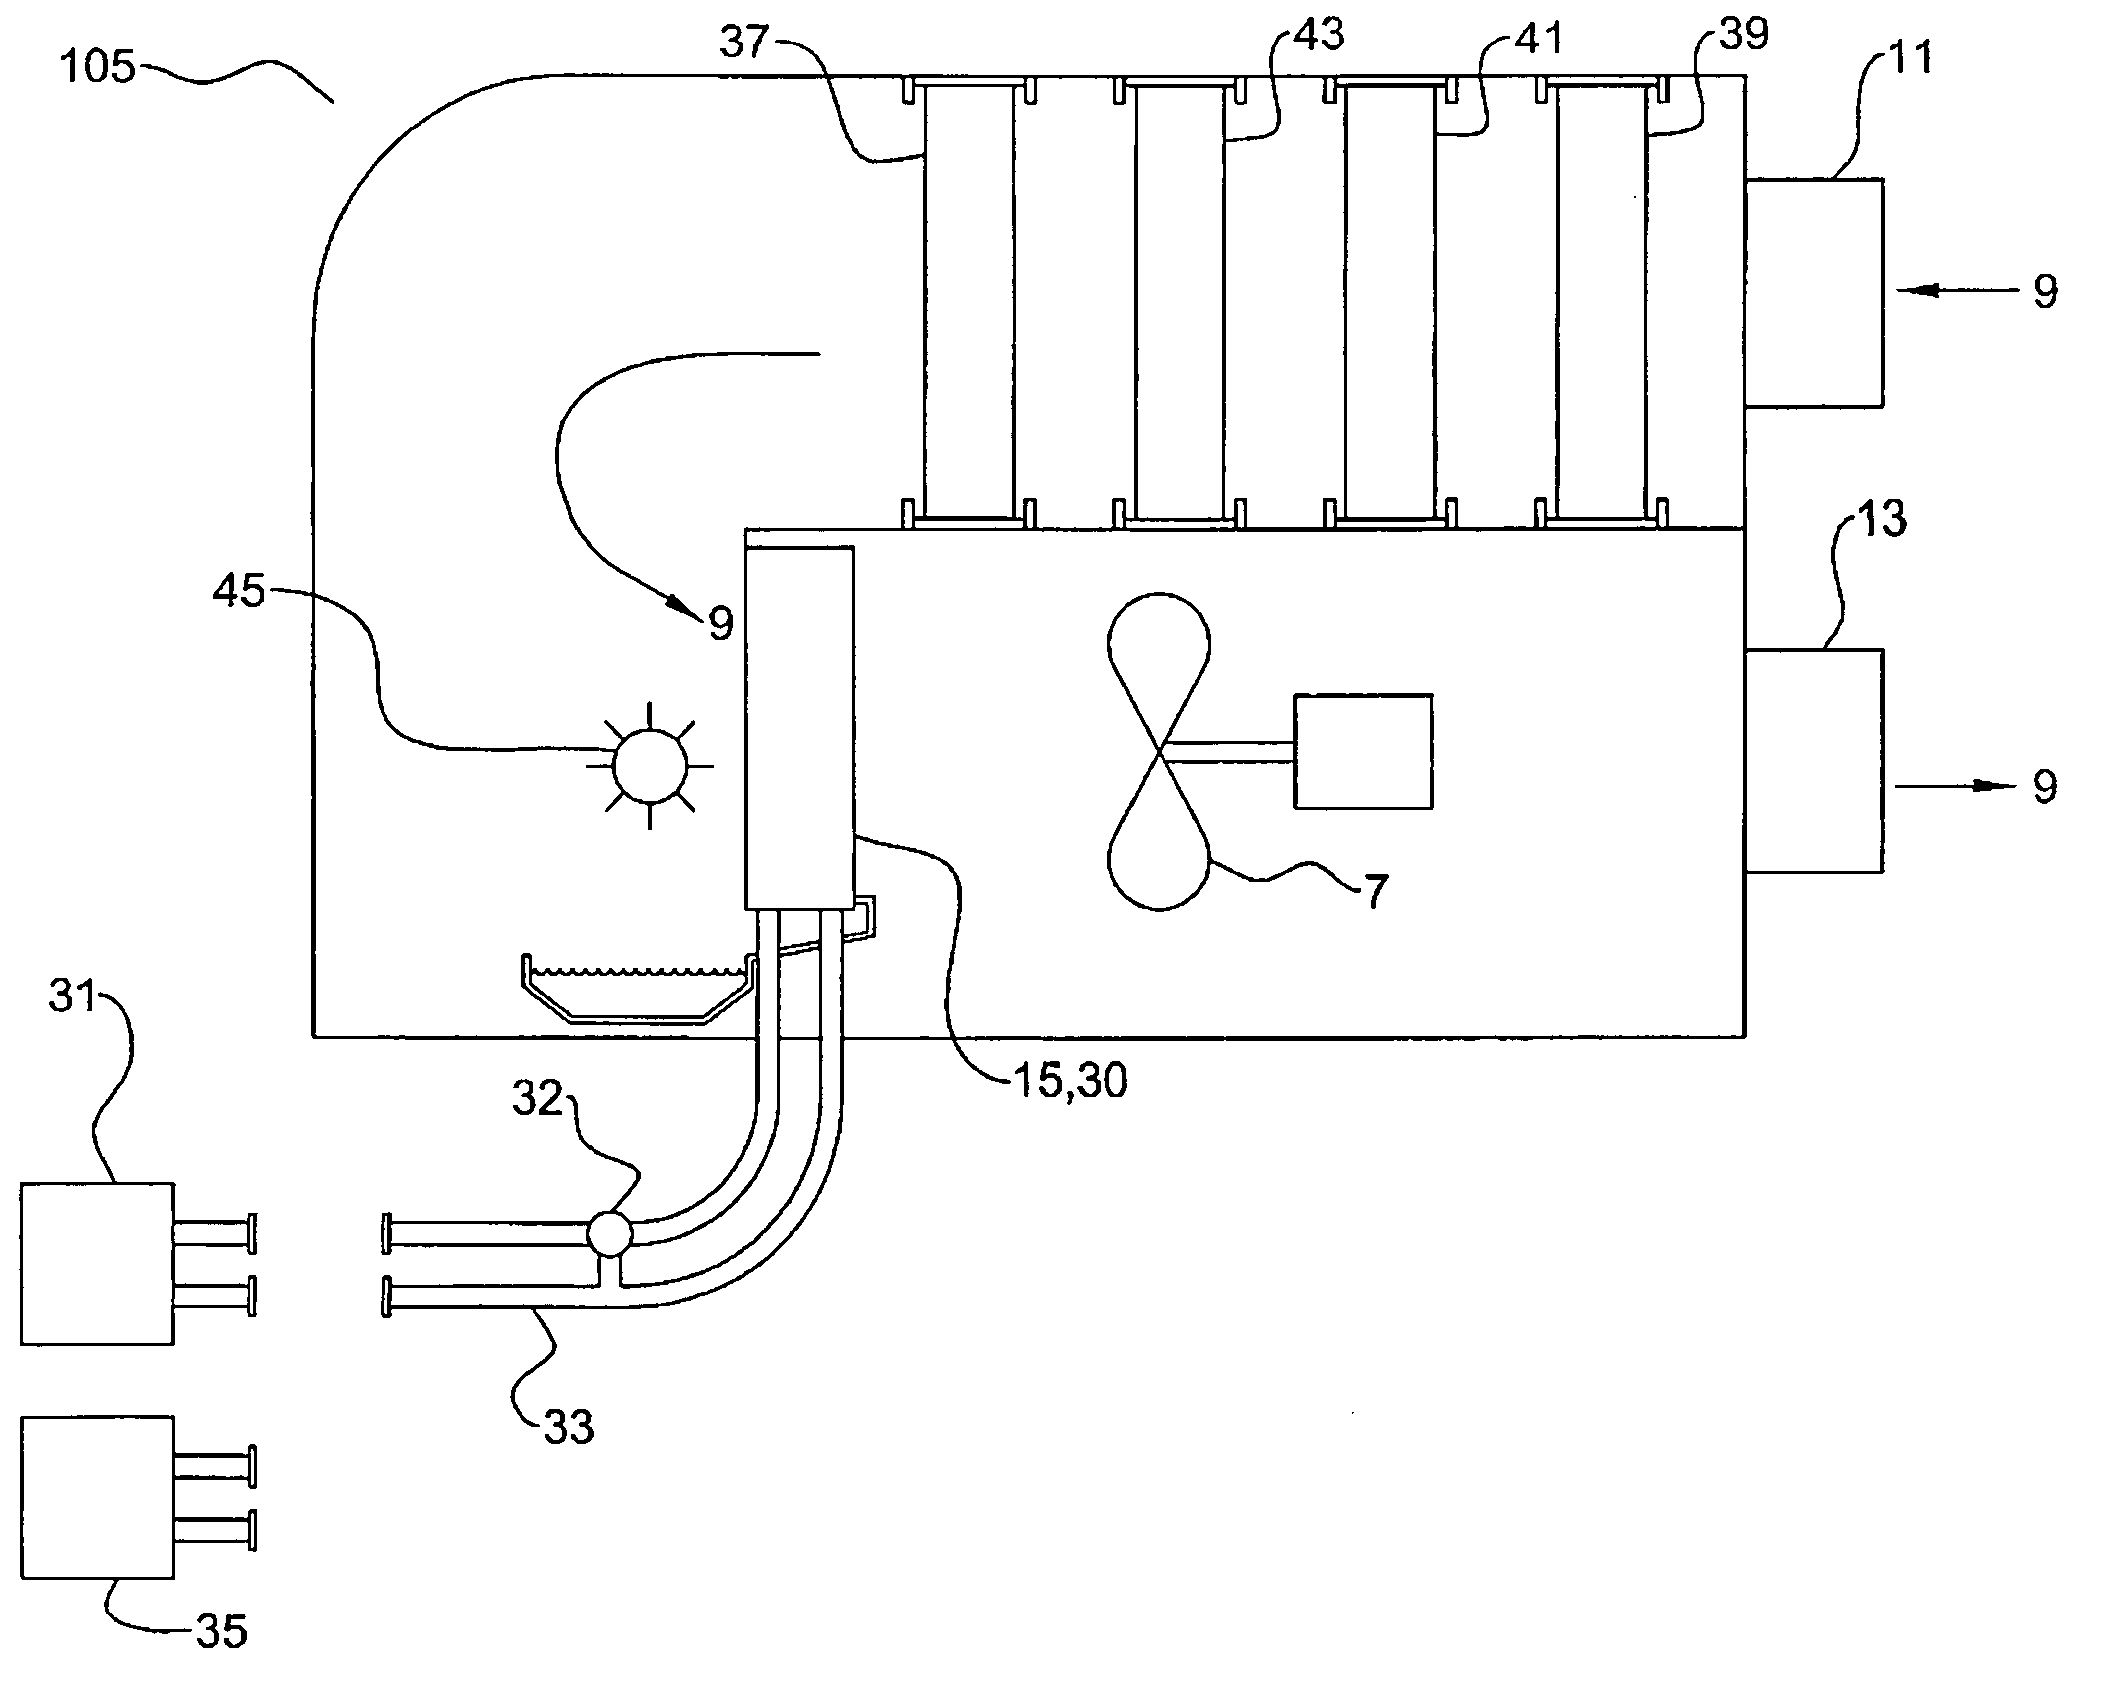 Method and apparatus for controlling humidity and mold